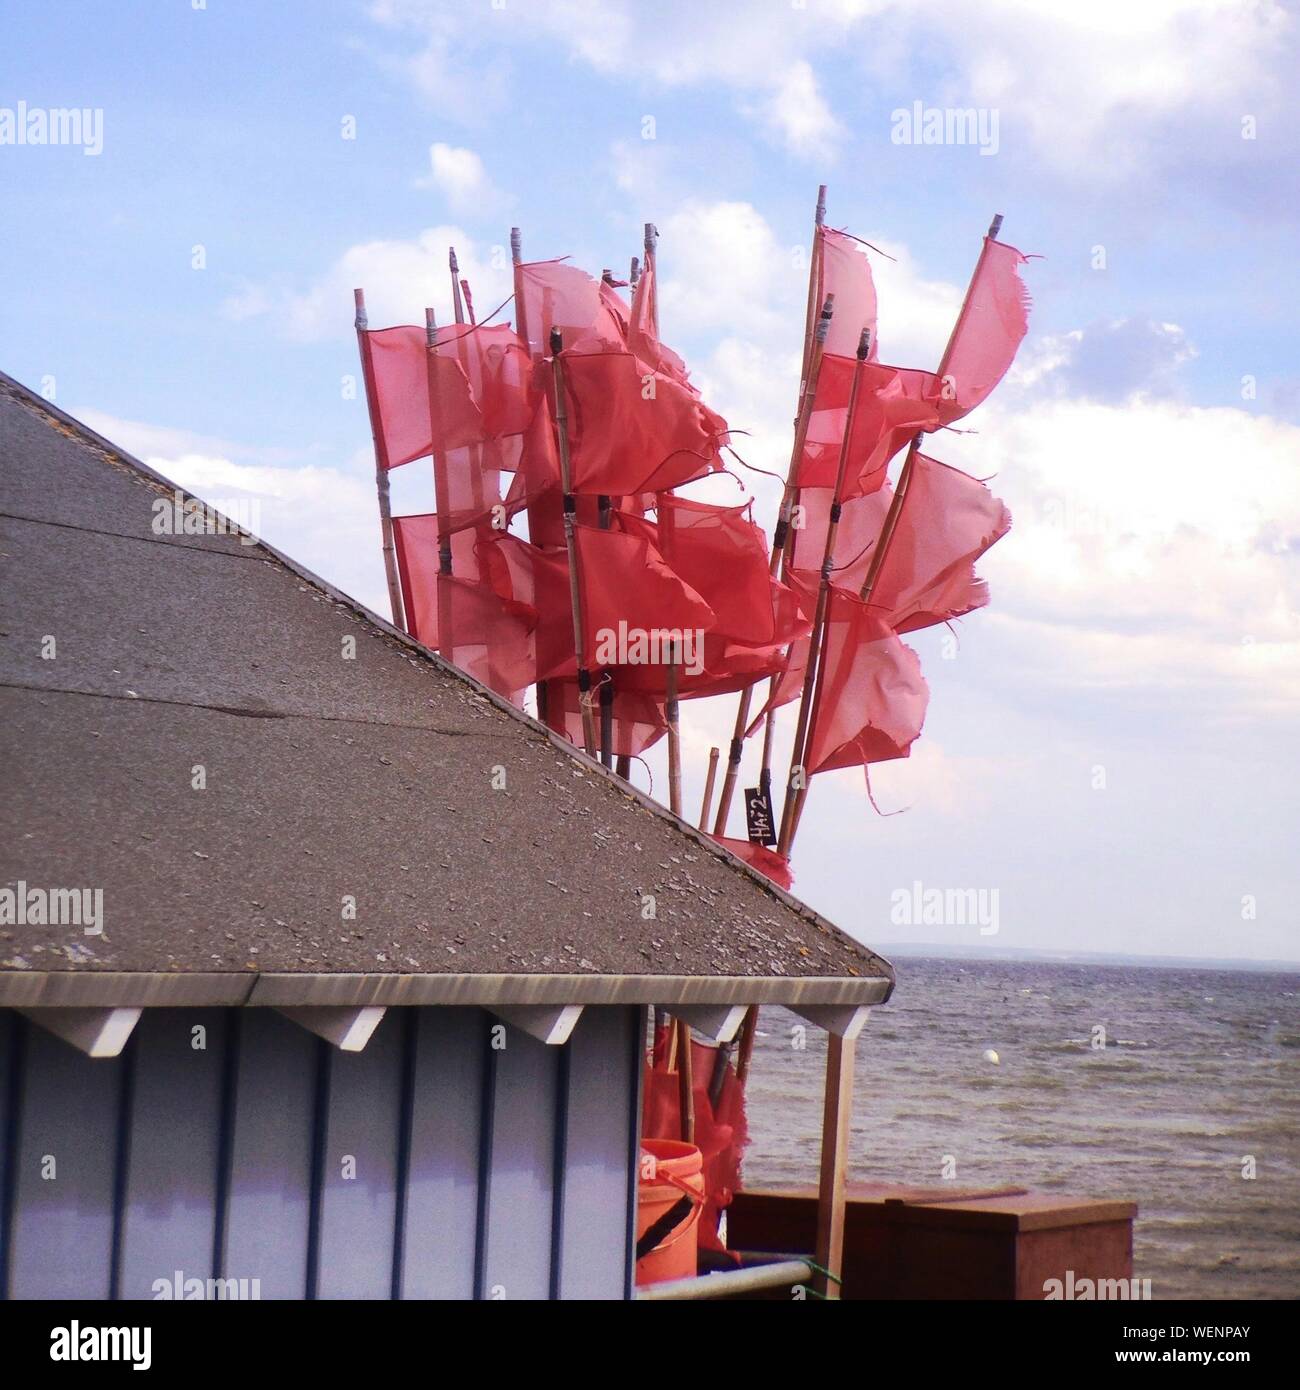 Scenic View Of Red Flags In Wind By Hut Against Sky Stock Photo